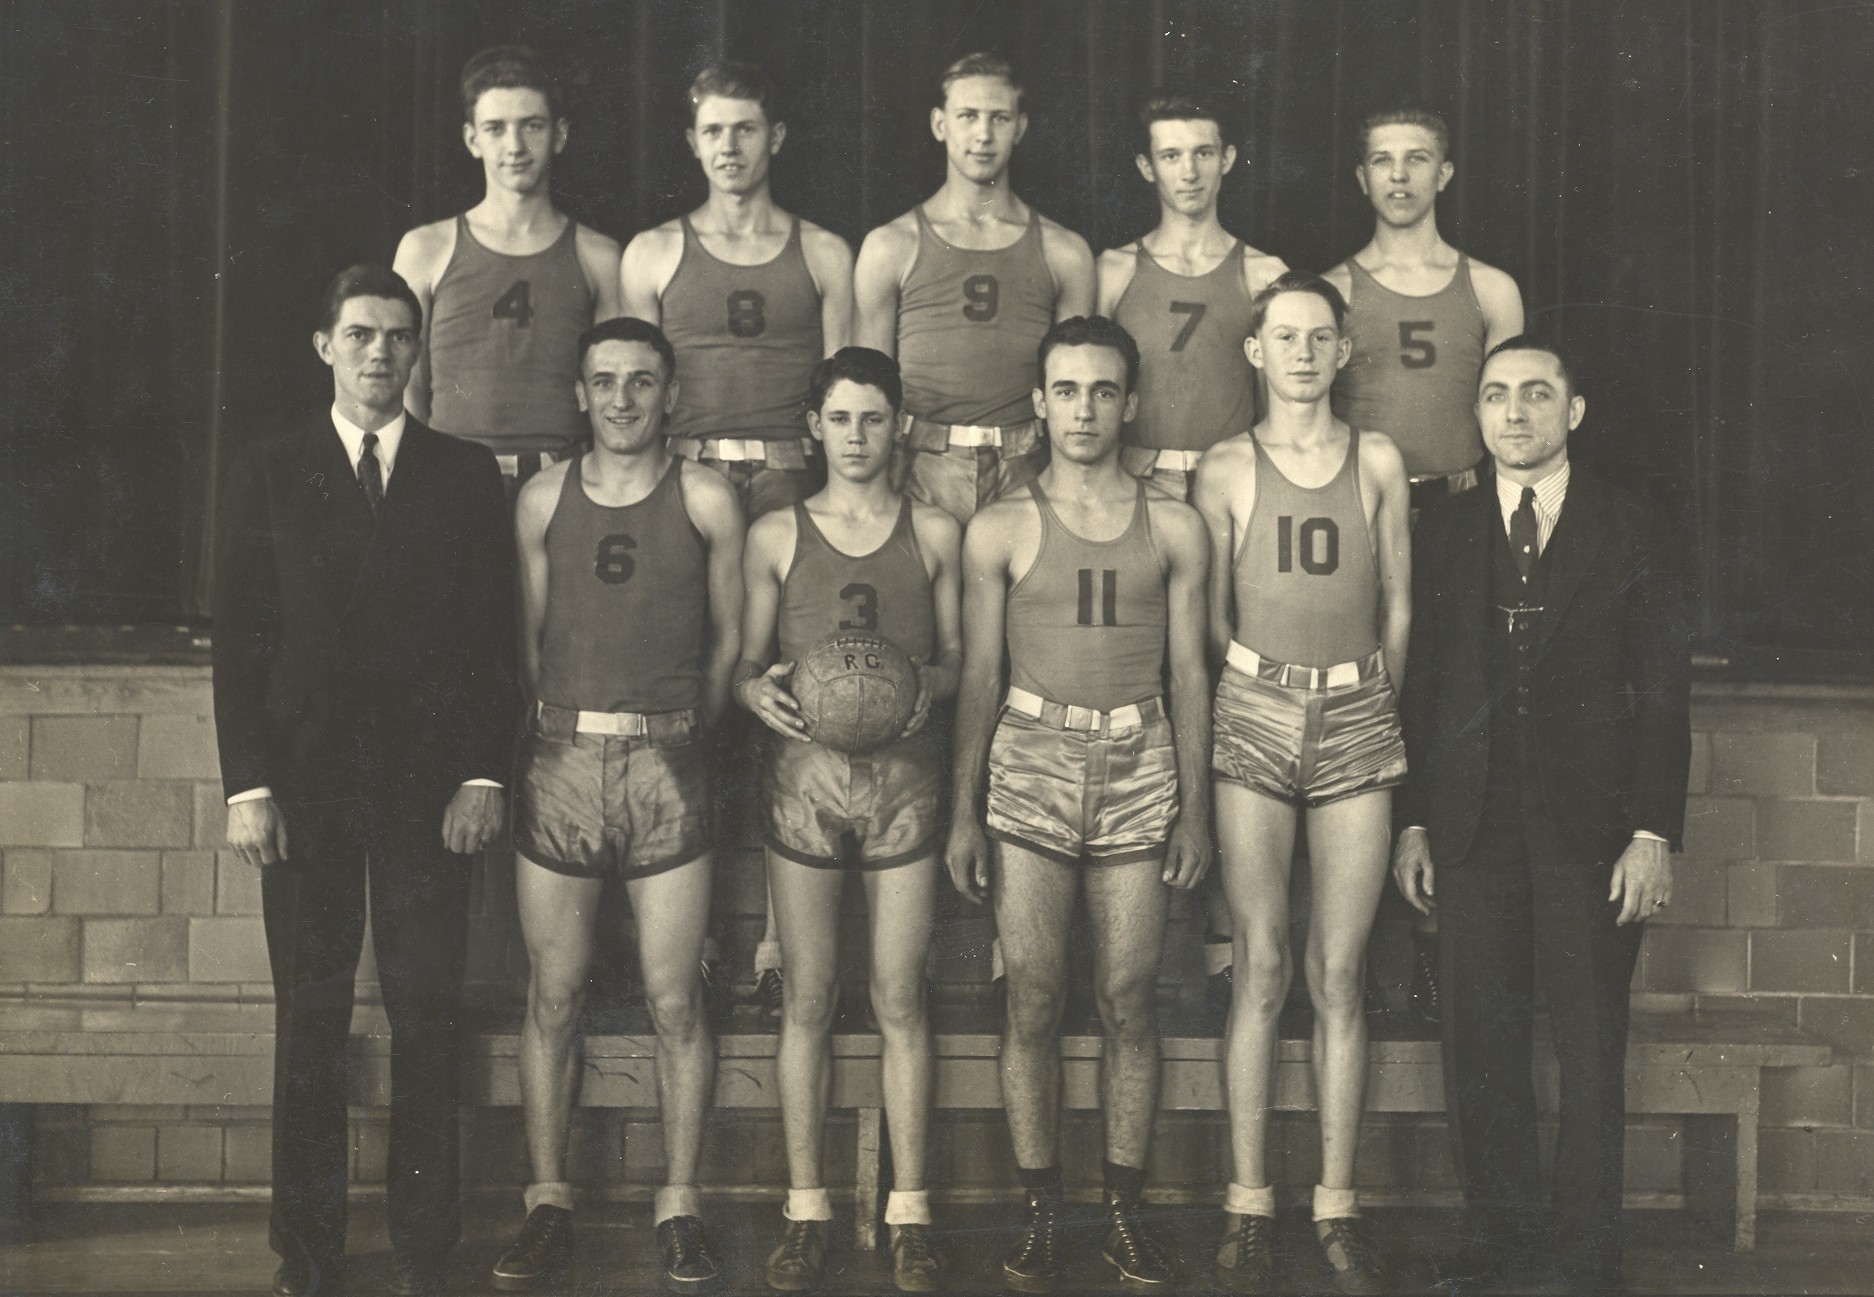 RGHS Basketball Team (1936): MANNING FAMILY COLLECTION. Lou Manning is #10 in the front row. In 1936, a new Gym was constructed as an addition to  the original Science Hill School building. This picture was taken in that new Gym. Thanks Dave! 